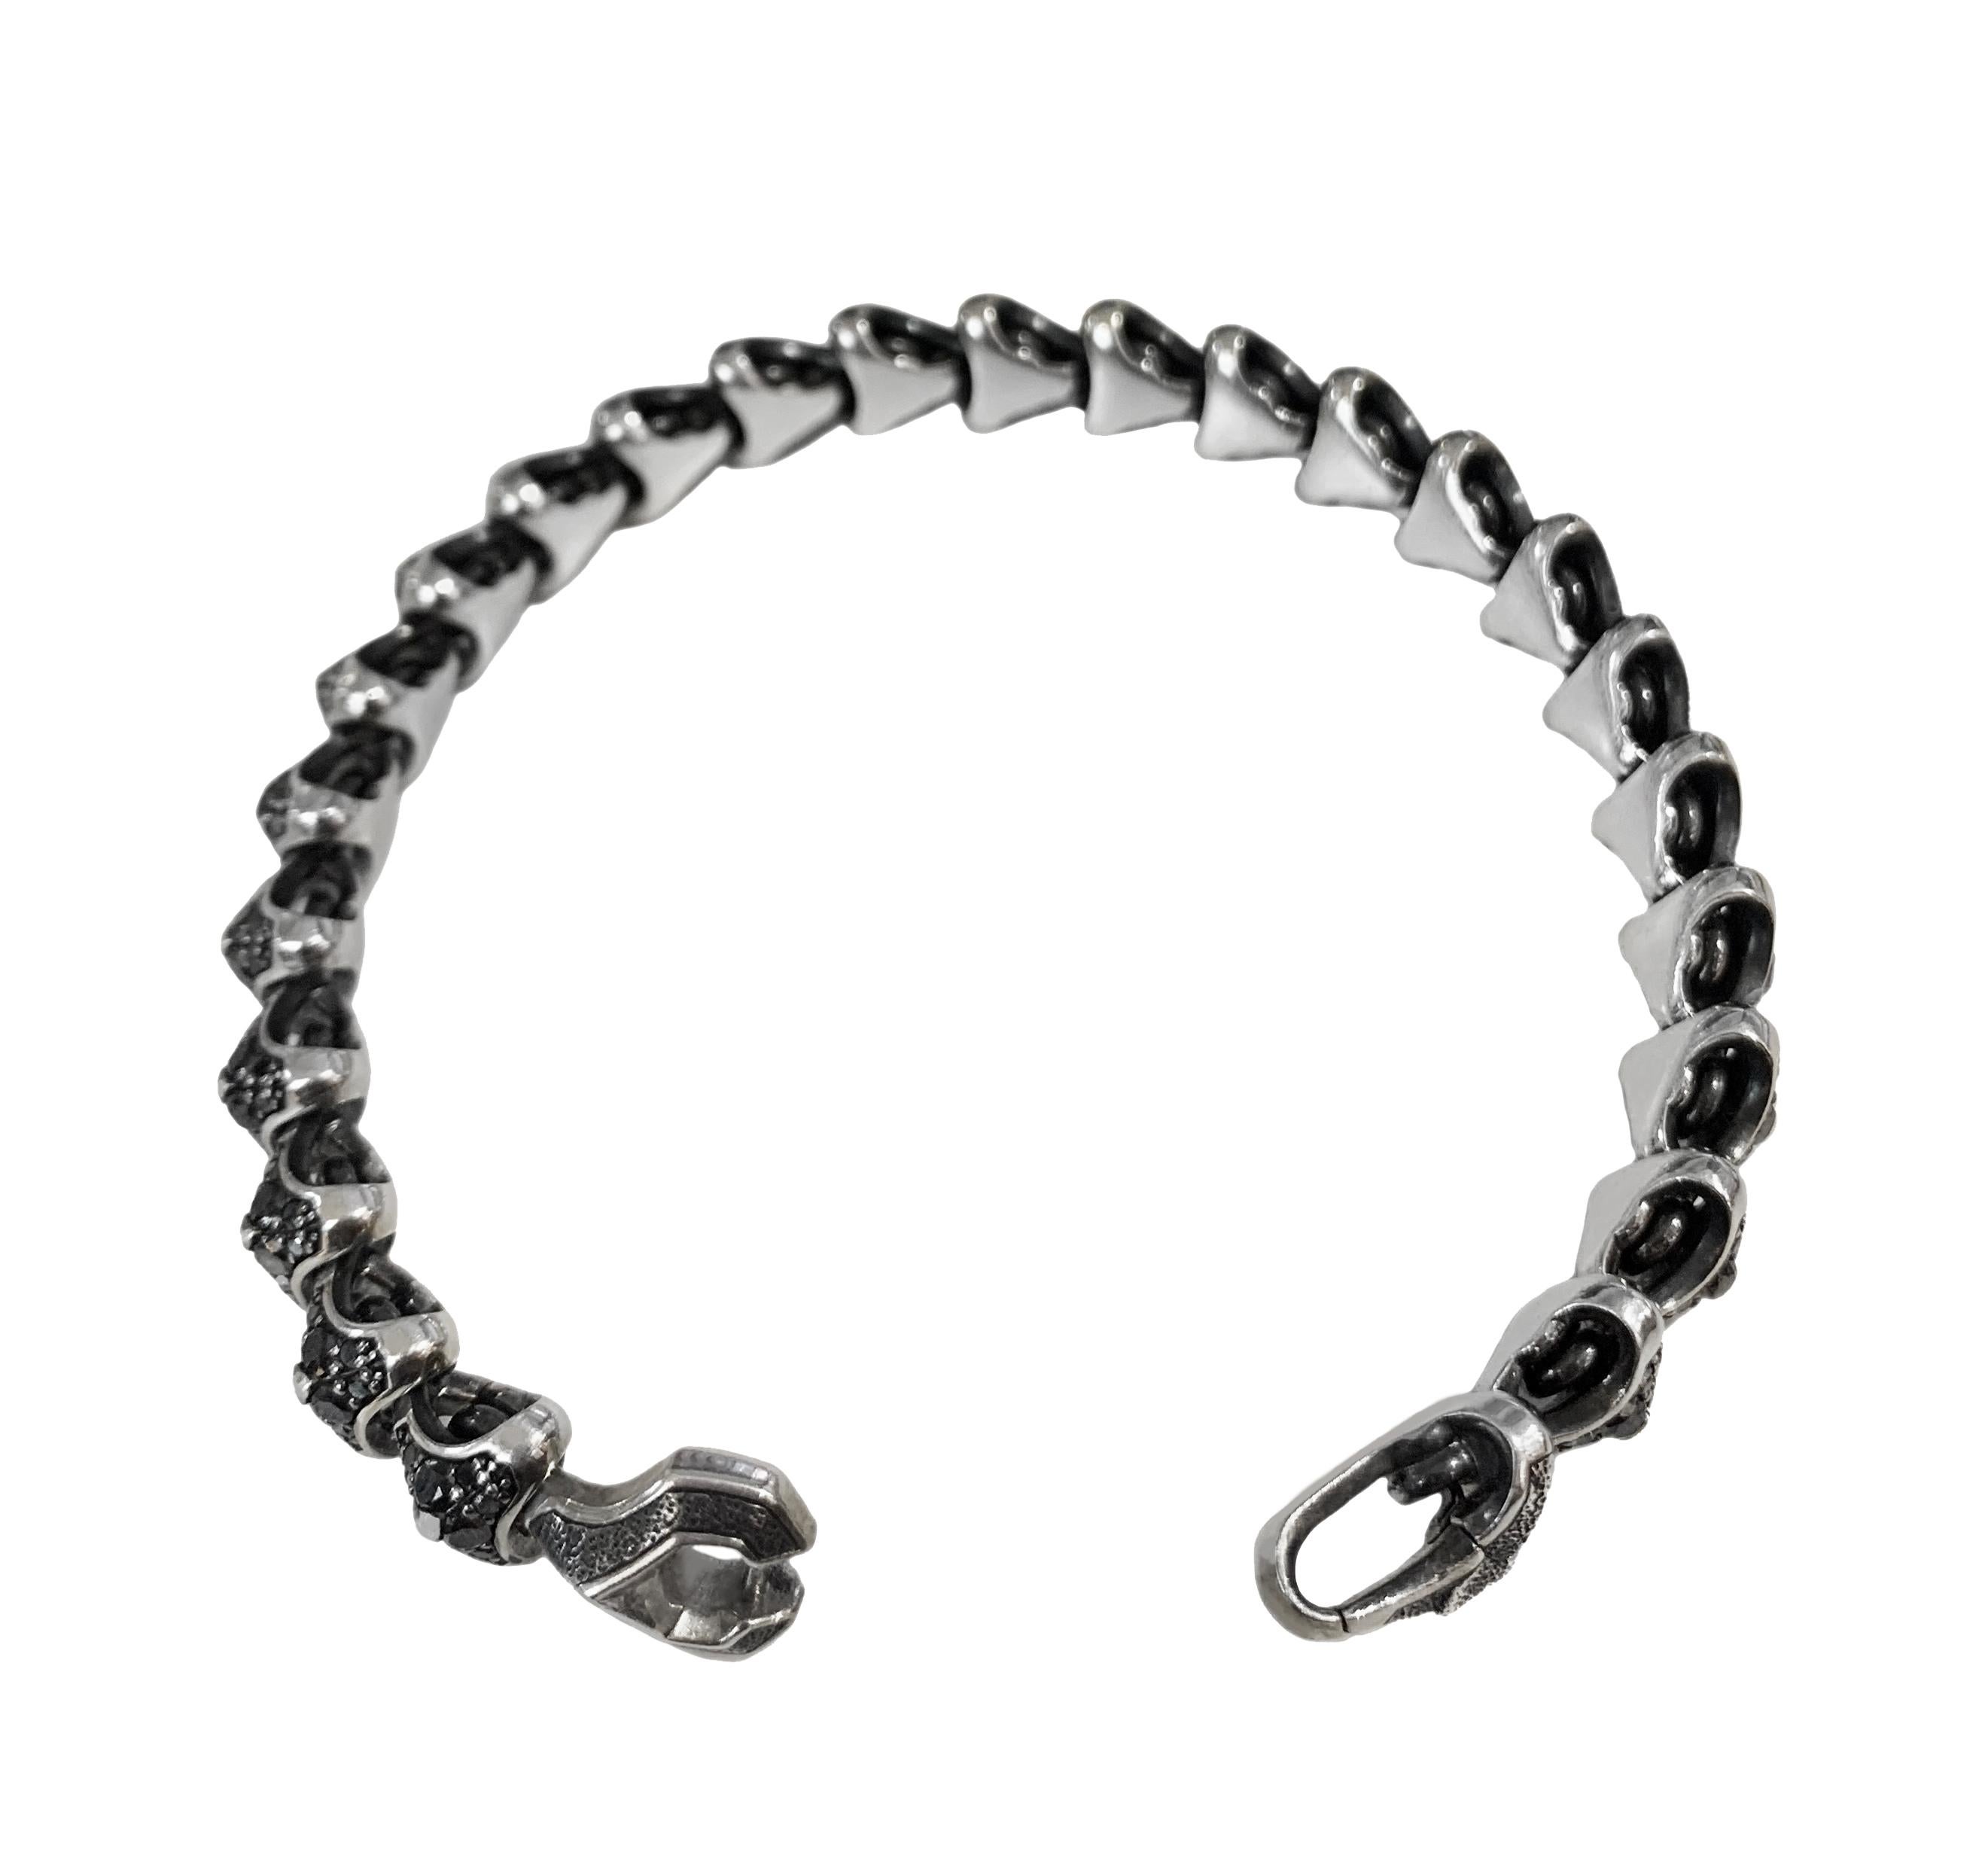 -Mint condition
-Inner circumference: 8”
-Sterling silver
-Pavé black diamonds, 5.04 total carat weight
-Bracelet, 9.5mm wide 
-Push Clasp
-David Yurman pouch is included
-Retail: $4800